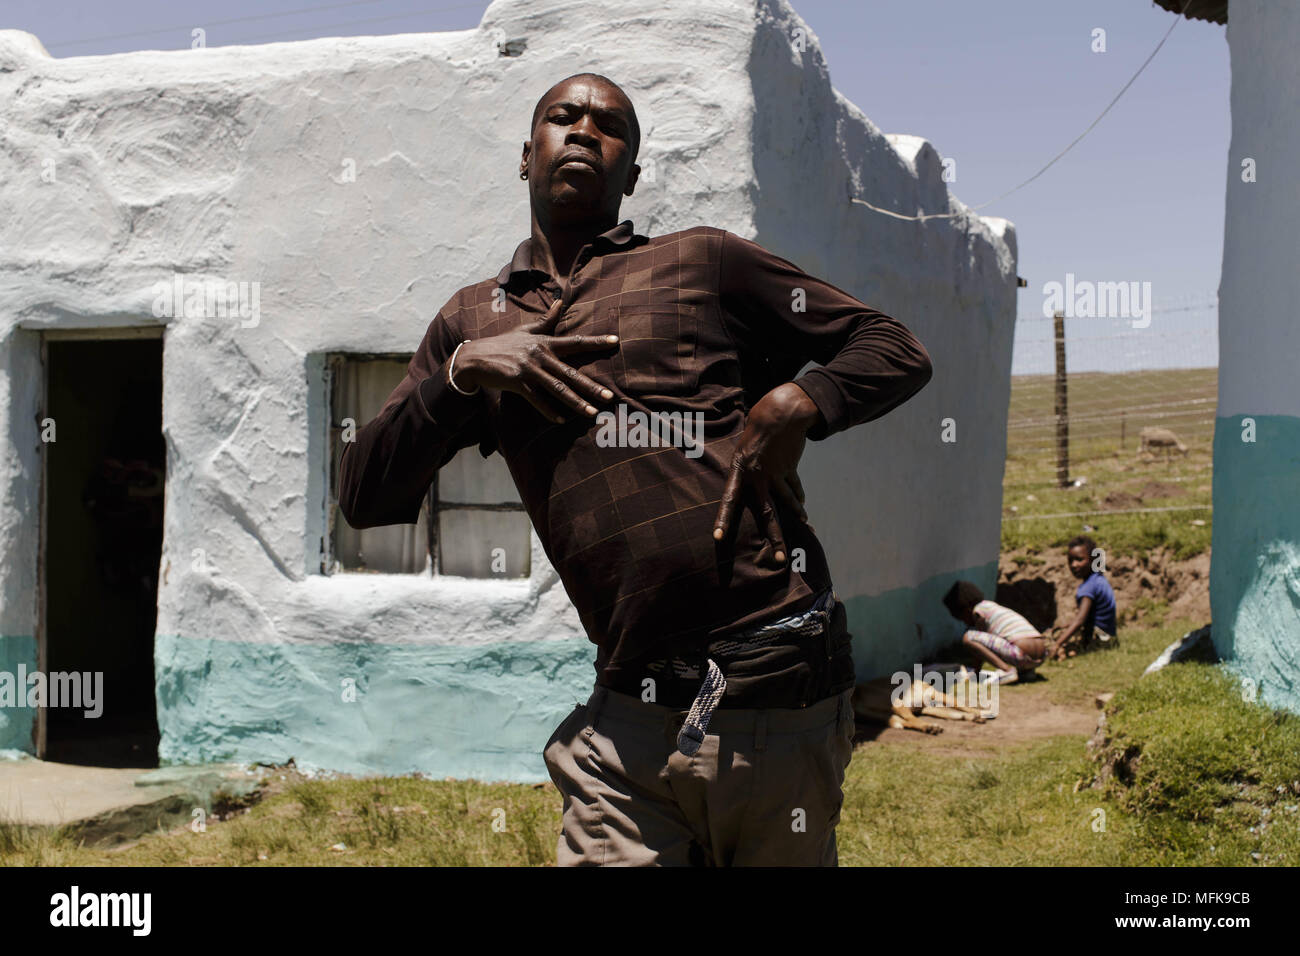 December 8, 2017 - Matatiele, Eastern Cape, South Africa - Bulelani, 29, ex convict at an initiation ceremony, and a proud member of the 28 gang. (Credit Image: © Stefan Kleinowitz via ZUMA Wire) Stock Photo